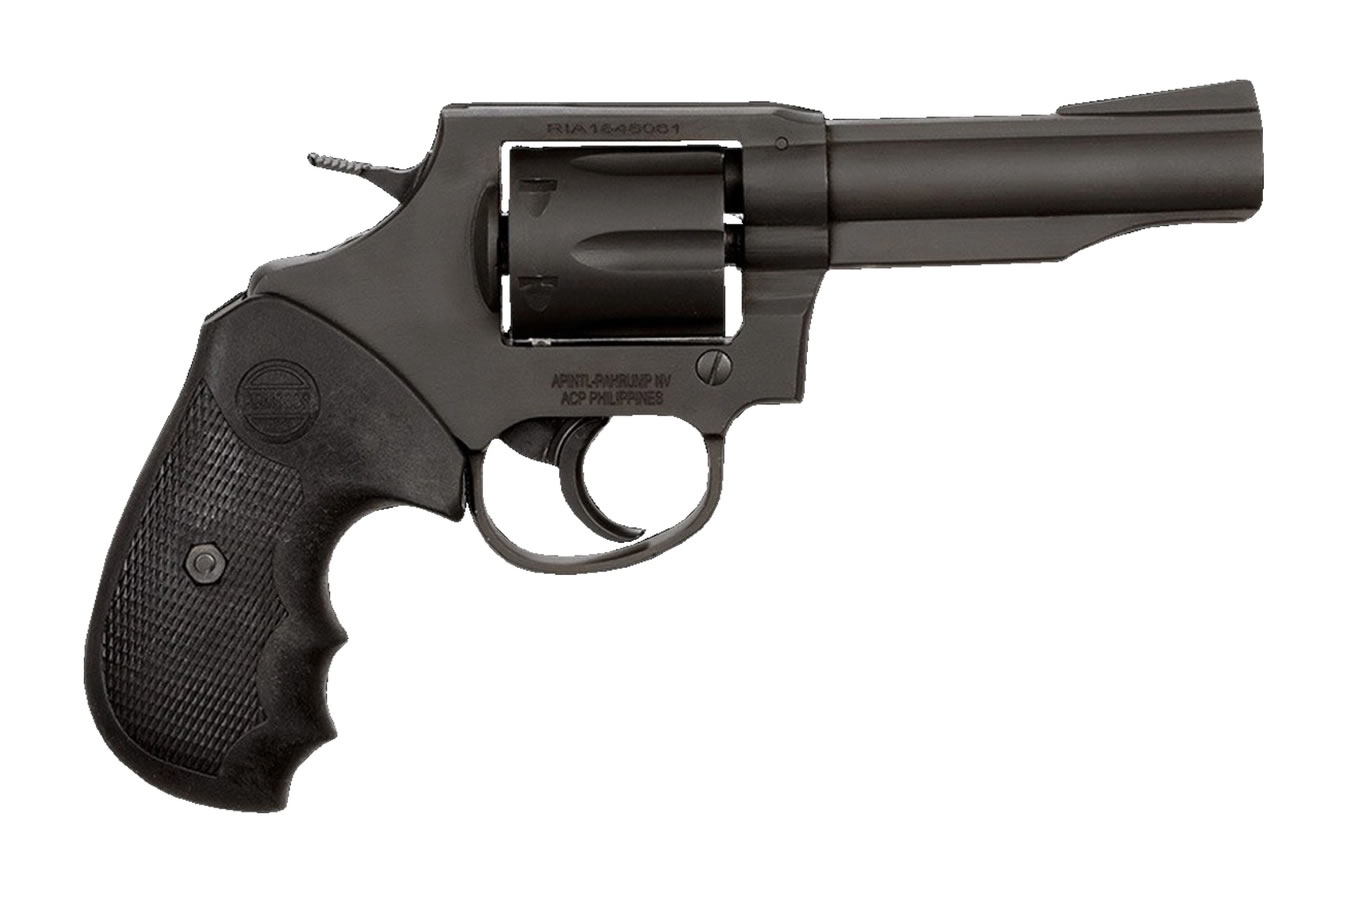 Armscor, M200, Revolver, Double Action/Single Action, 38 Special, 4" Barrel, Steel, Parkerized Finish, Black, Polymer Grip, Fixed Sights, 6 Rounds